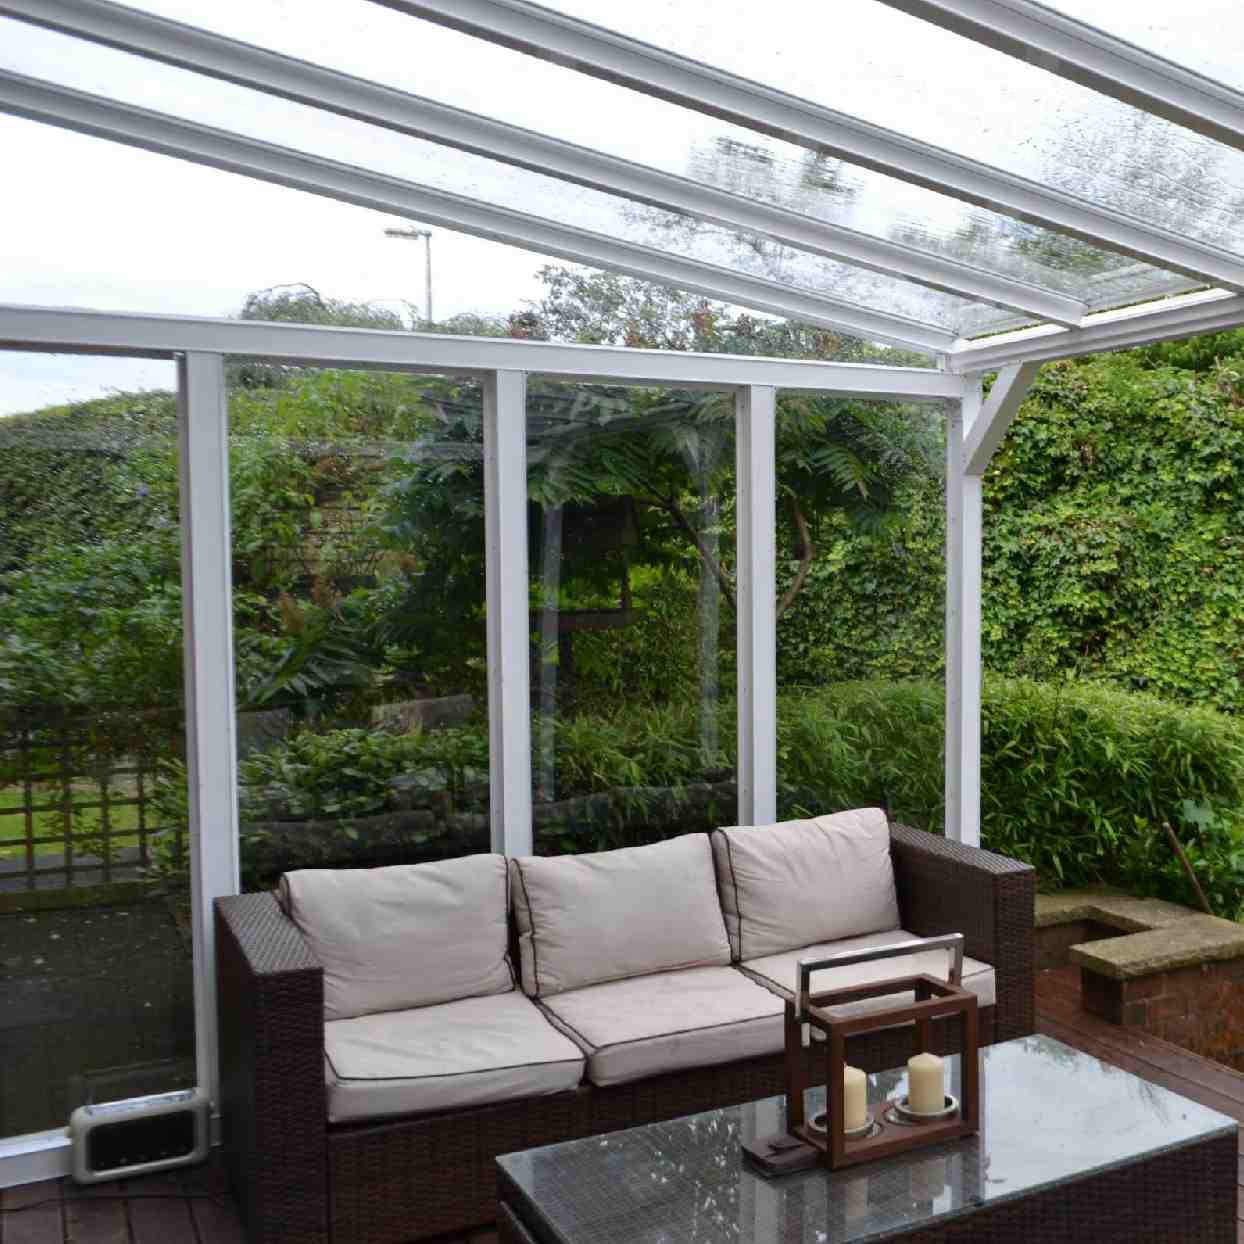 Buy Omega Verandah White with 6mm Glass Clear Plate Polycarbonate Glazing - 10.5m (W) x 3.0m (P), (5) Supporting Posts online today